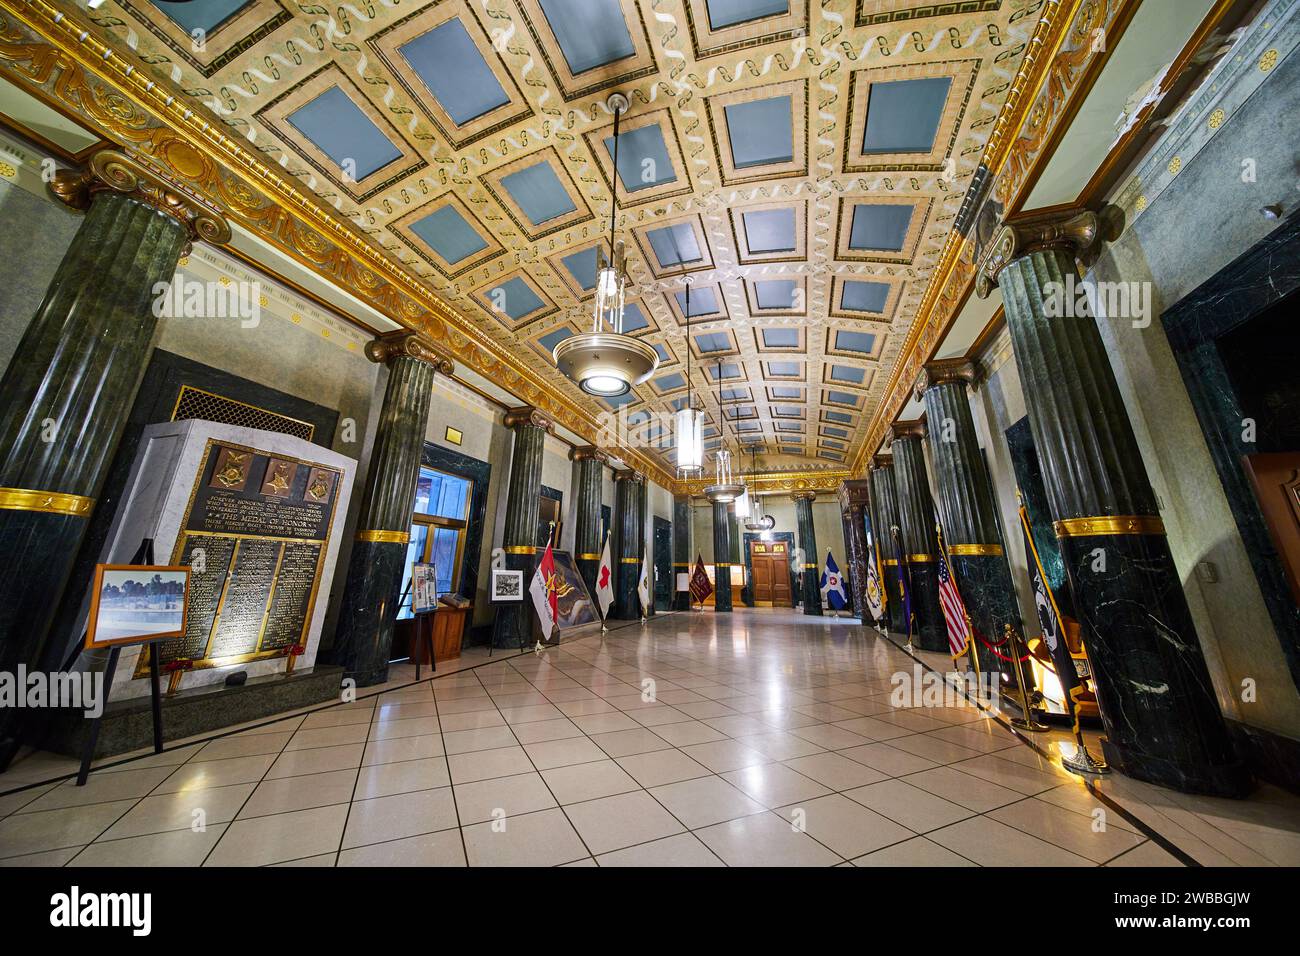 Historic Hallway with Columns, Gold Ceiling, Indianapolis War Memorial Museum Stock Photo